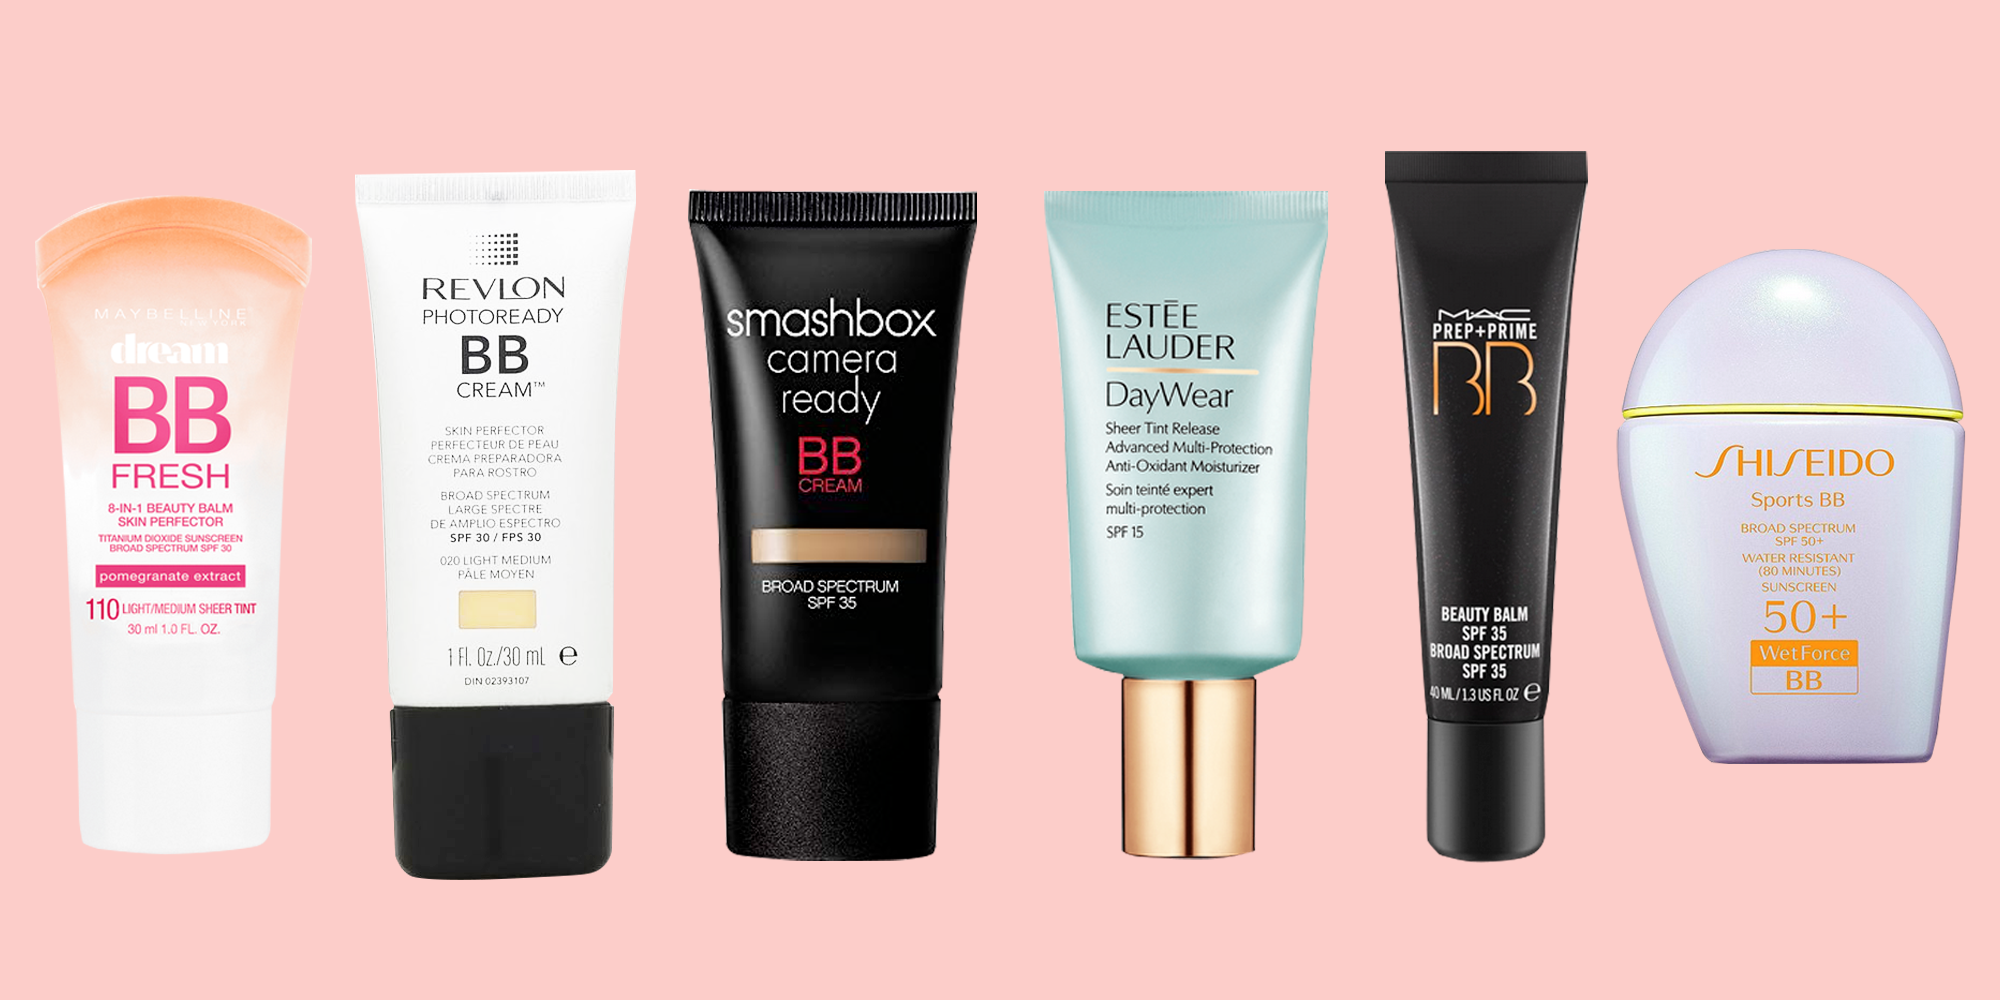  Maybelline Dream Fresh Skin Hydrating BB cream, 8-in-1 Skin  Perfecting Beauty Balm with Broad Spectrum SPF 30, Sheer Tint Coverage,  Oil-Free, Light/Medium, 1 Fl Oz : Beauty & Personal Care